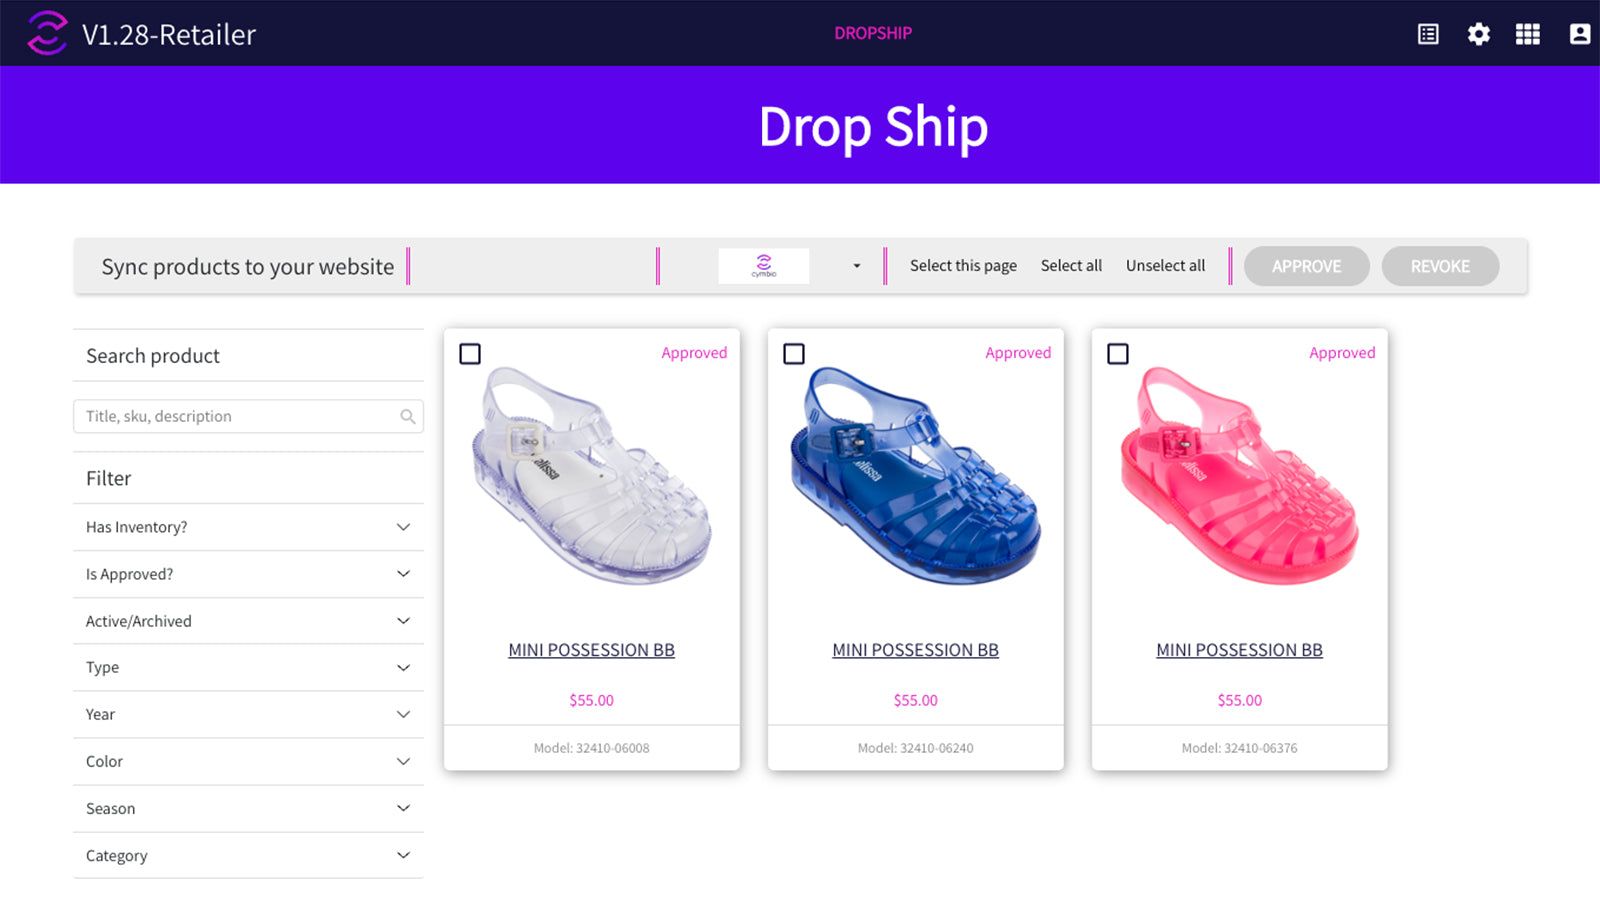 Product data is automatically pushed to Shopify 